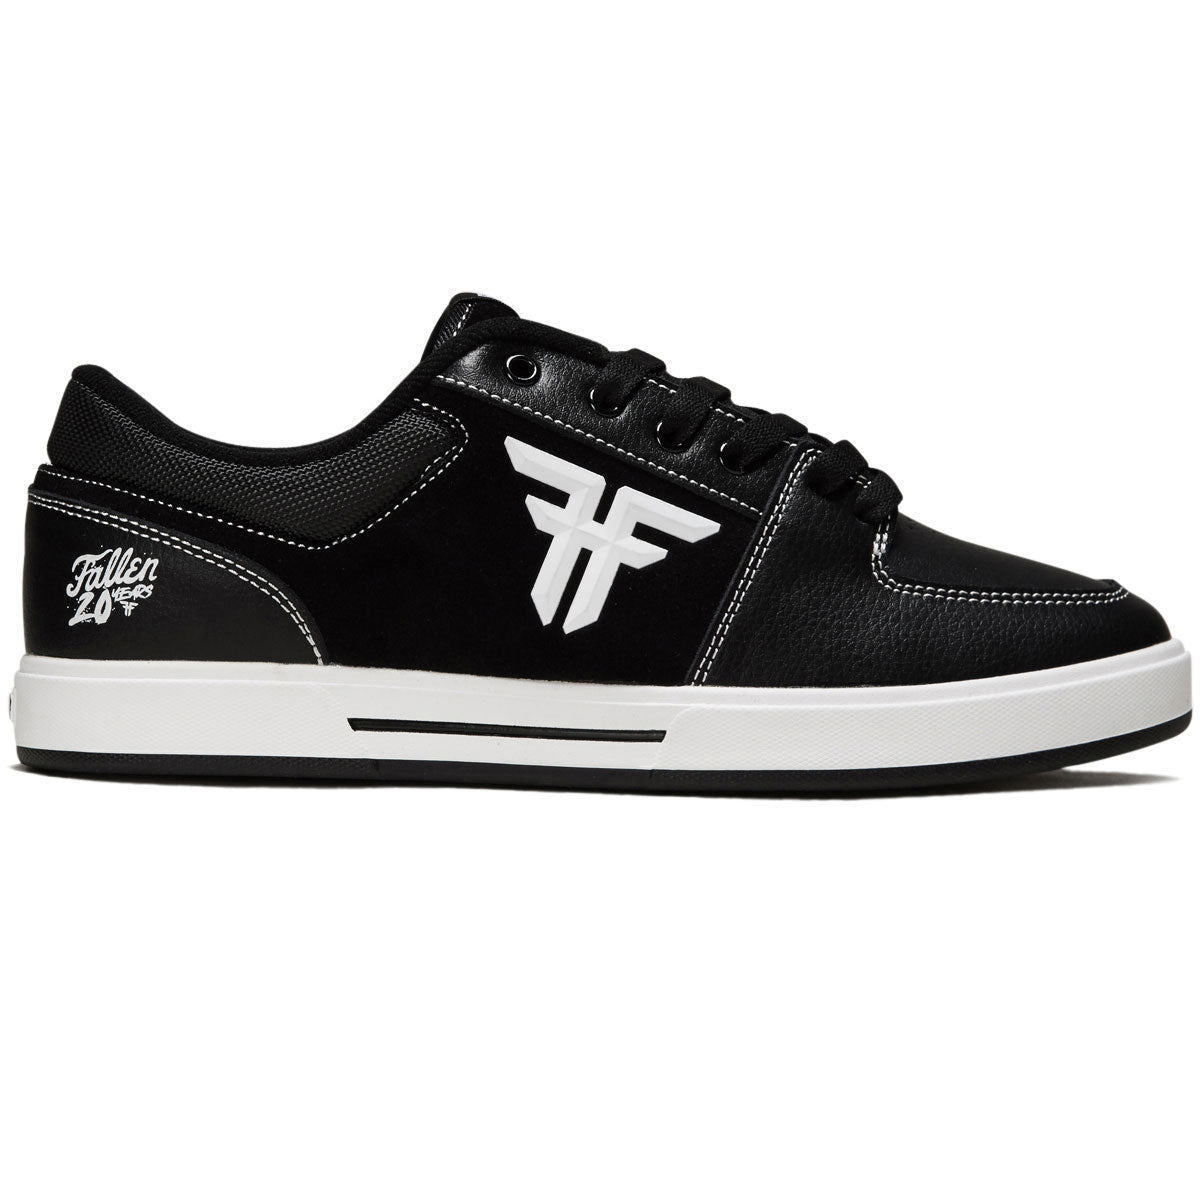 Fallen Patriot 20 Years Shoes - Black/White image 1